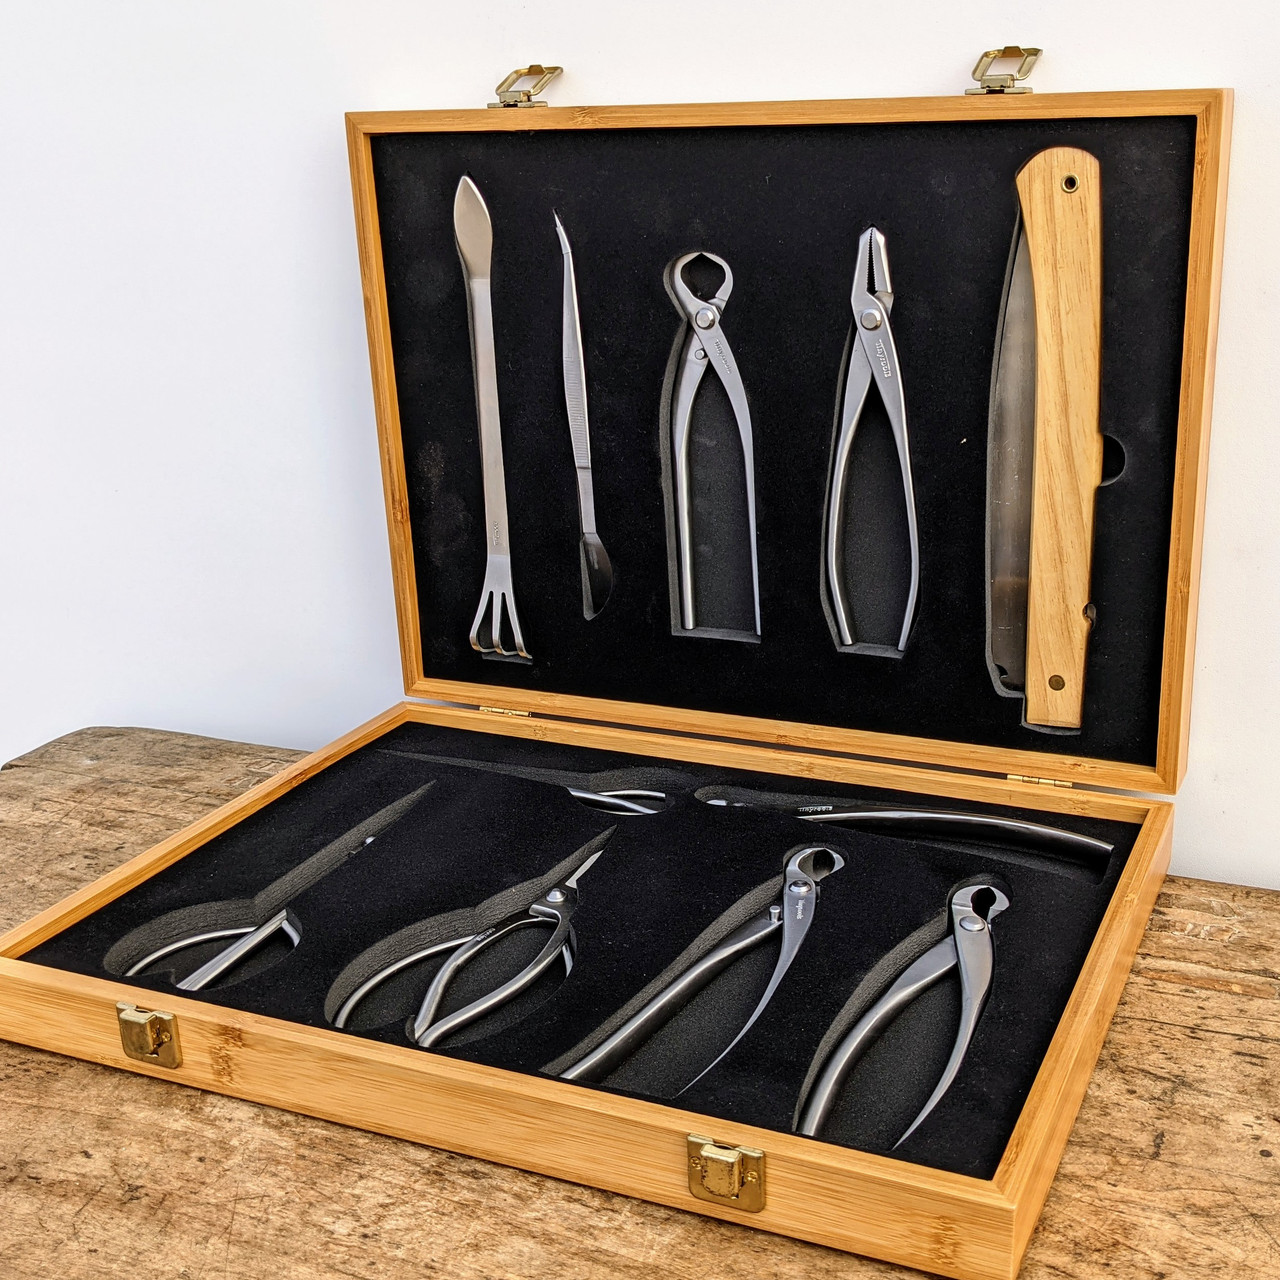 Tinyroots Ultimate Package - Stainless Steel Tool Kit. Contains 11 of the  finest stainless steel Bonsai tools in the world - all packaged in a